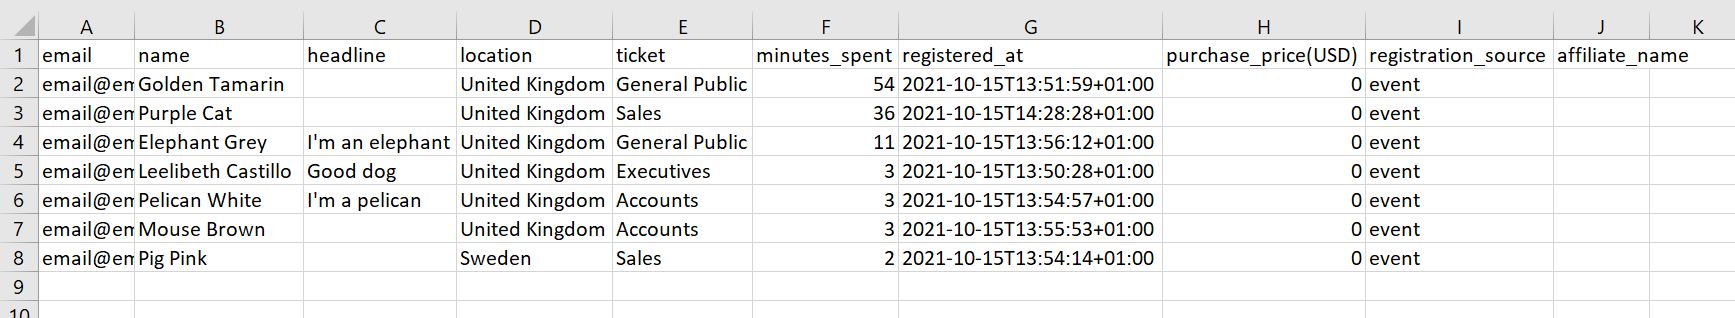 participation_by_schedule_excel.png